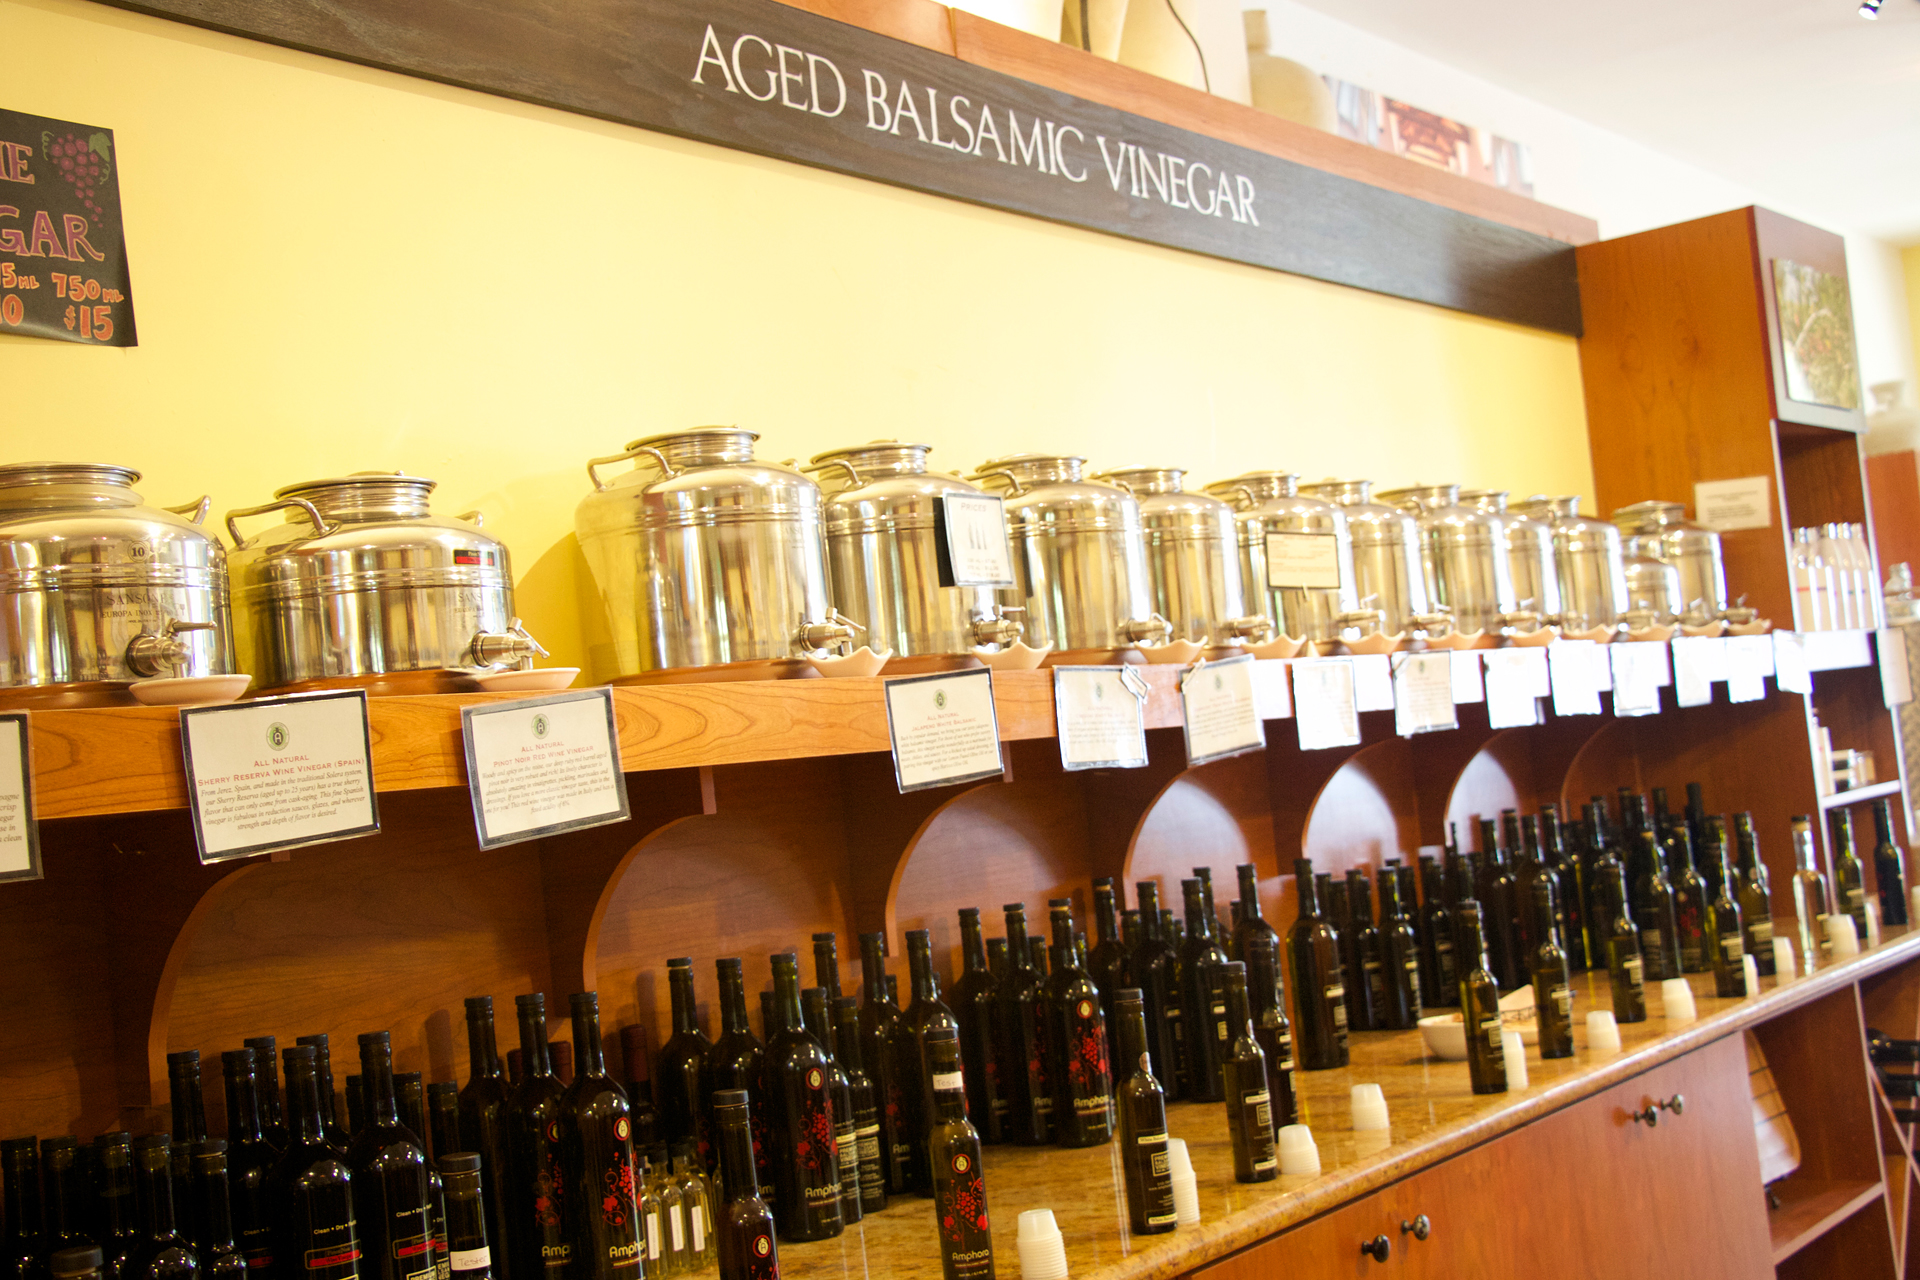 Aged balsamic and flavored vinegars line the shelves at Amphora.